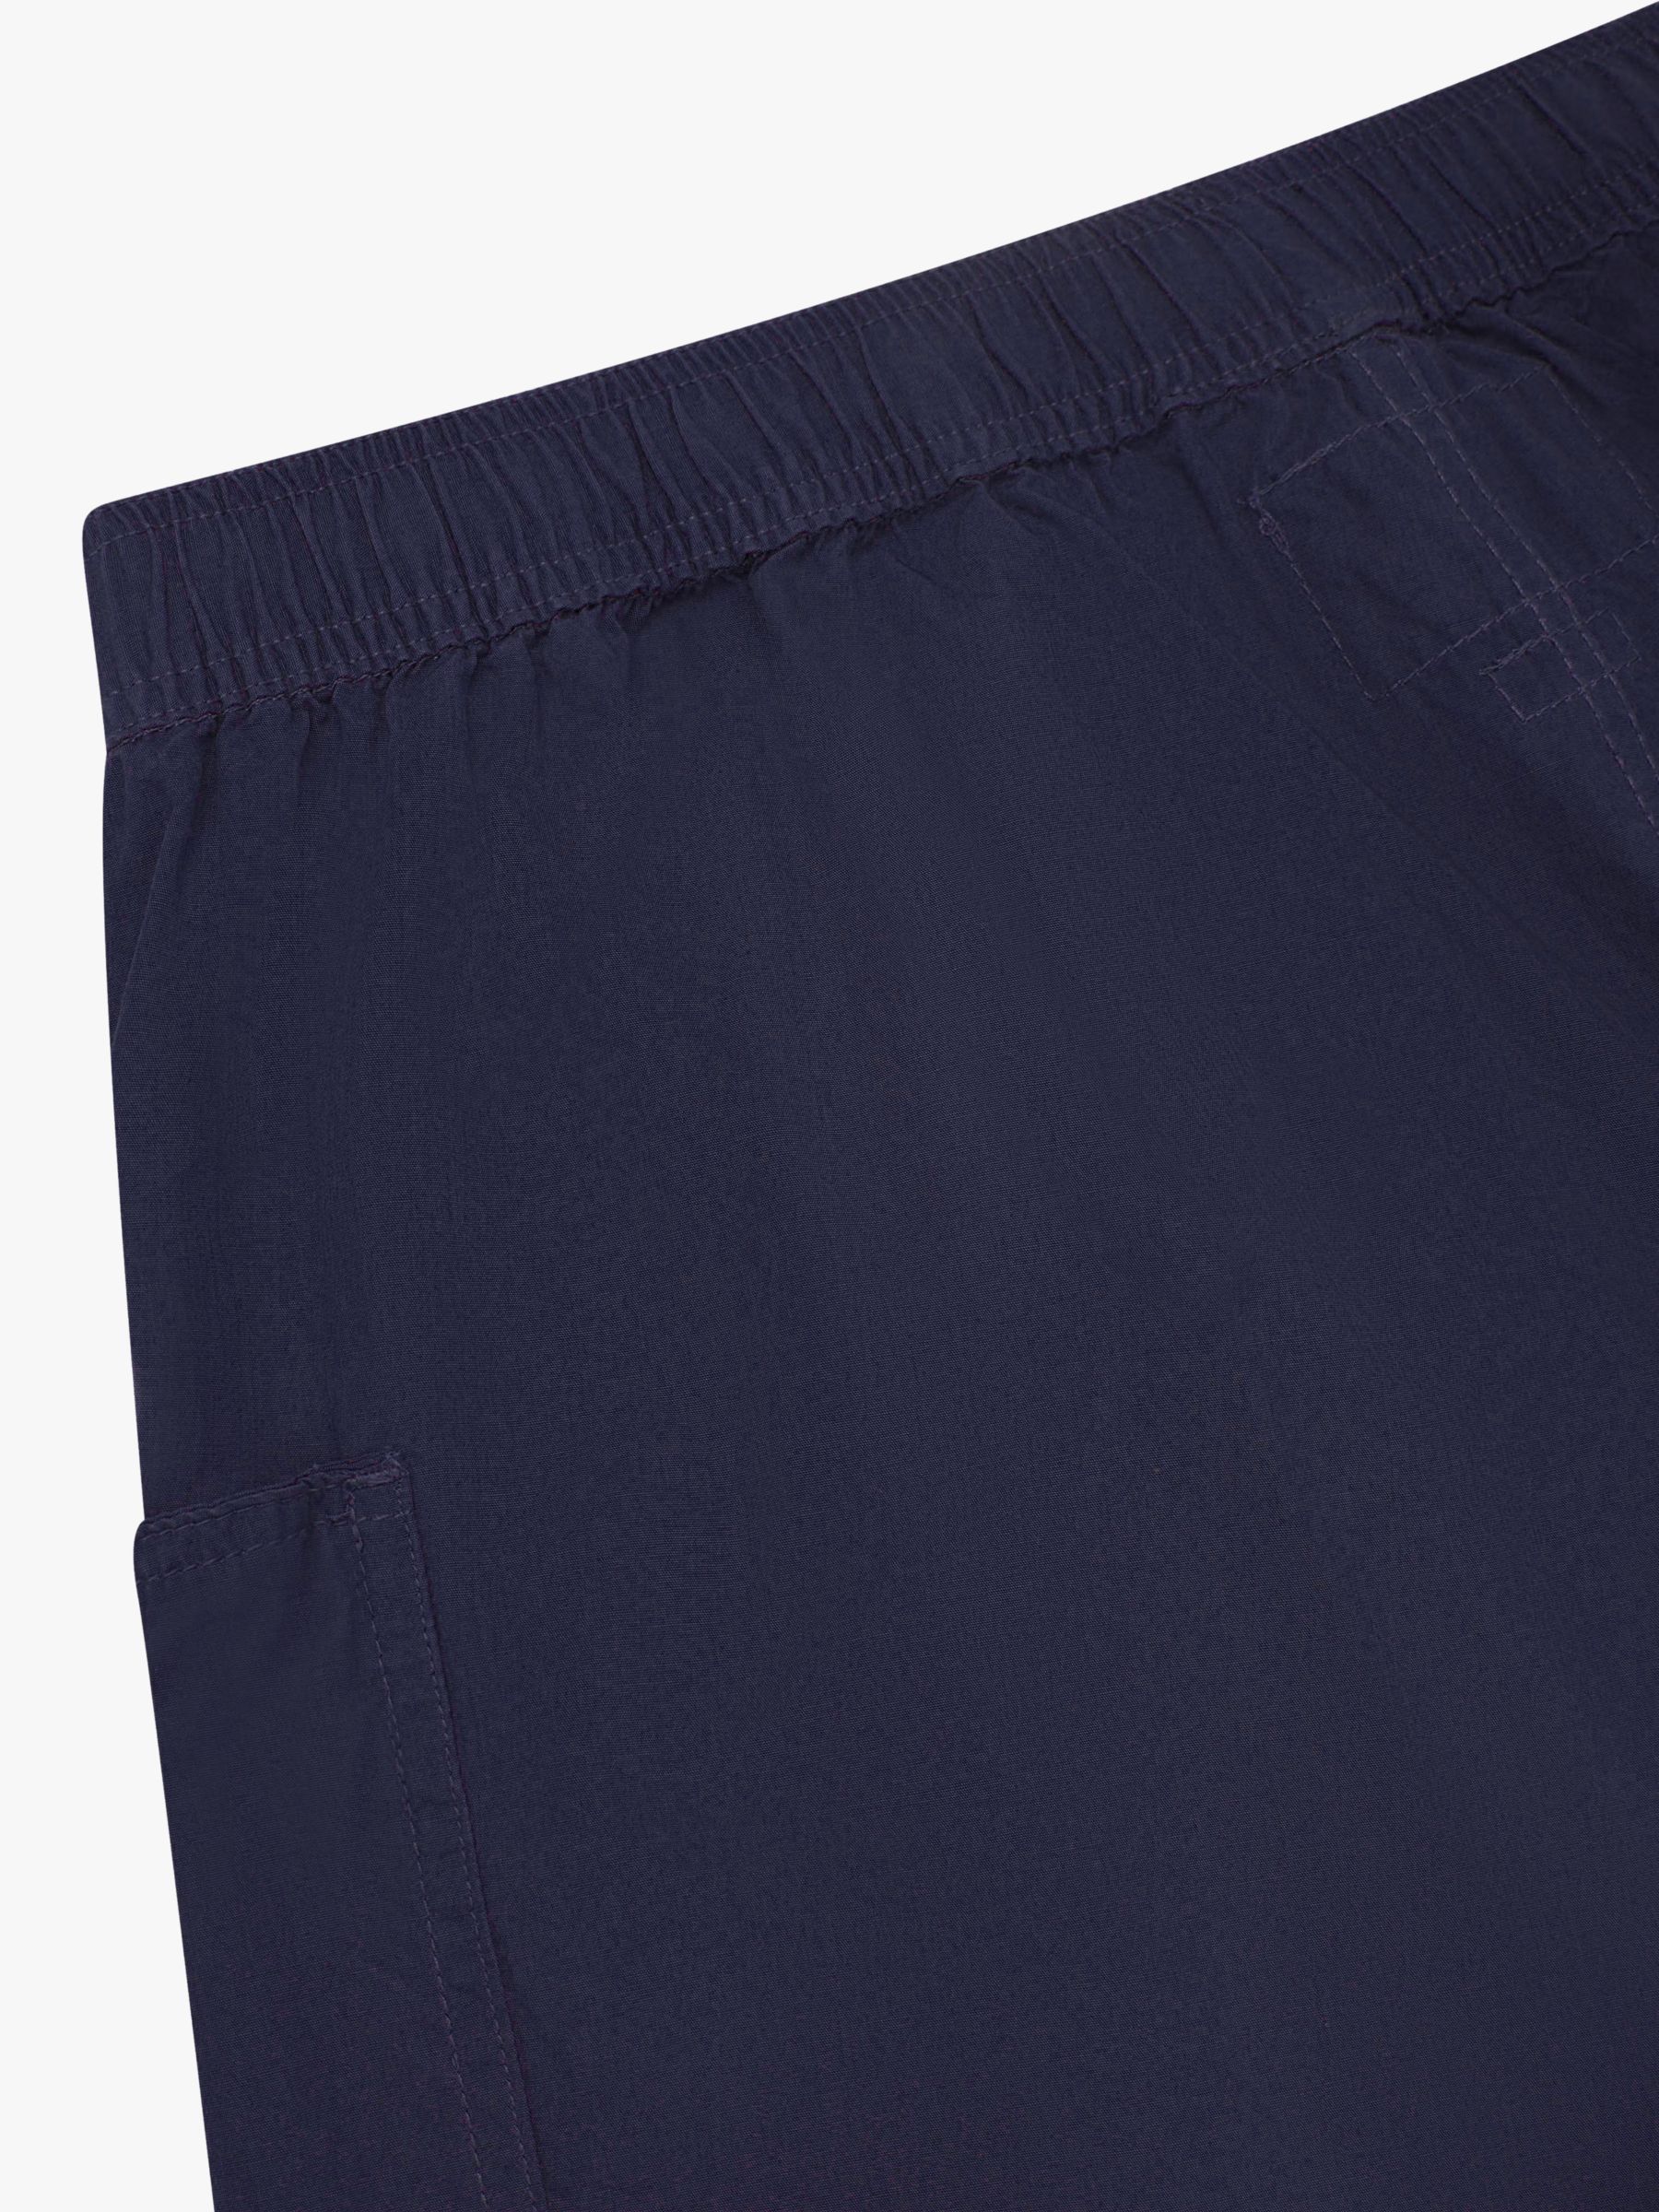 Buy Uskees 5015 Lightweight Shorts, Midnight Blue Online at johnlewis.com